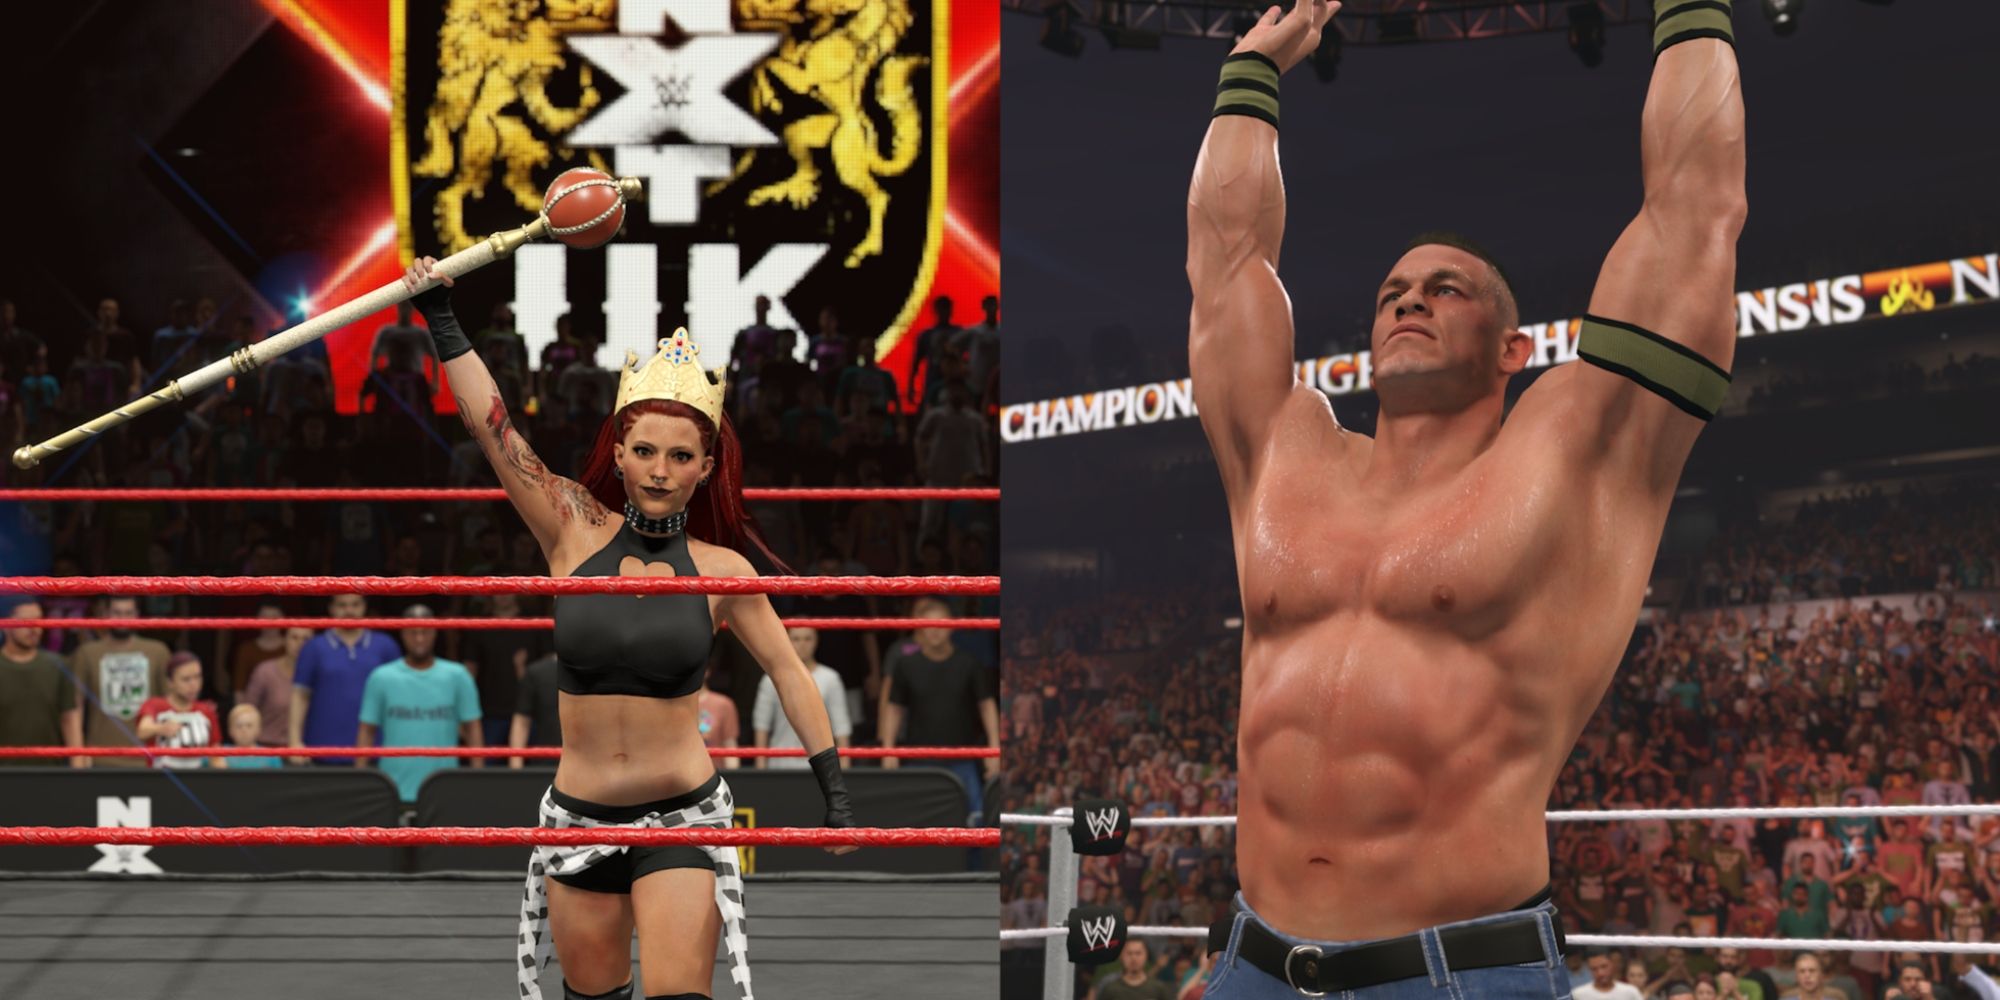 WWE 2K23 Achievement And Trophy Featured Split Image Of Created Wrestler And John Cena